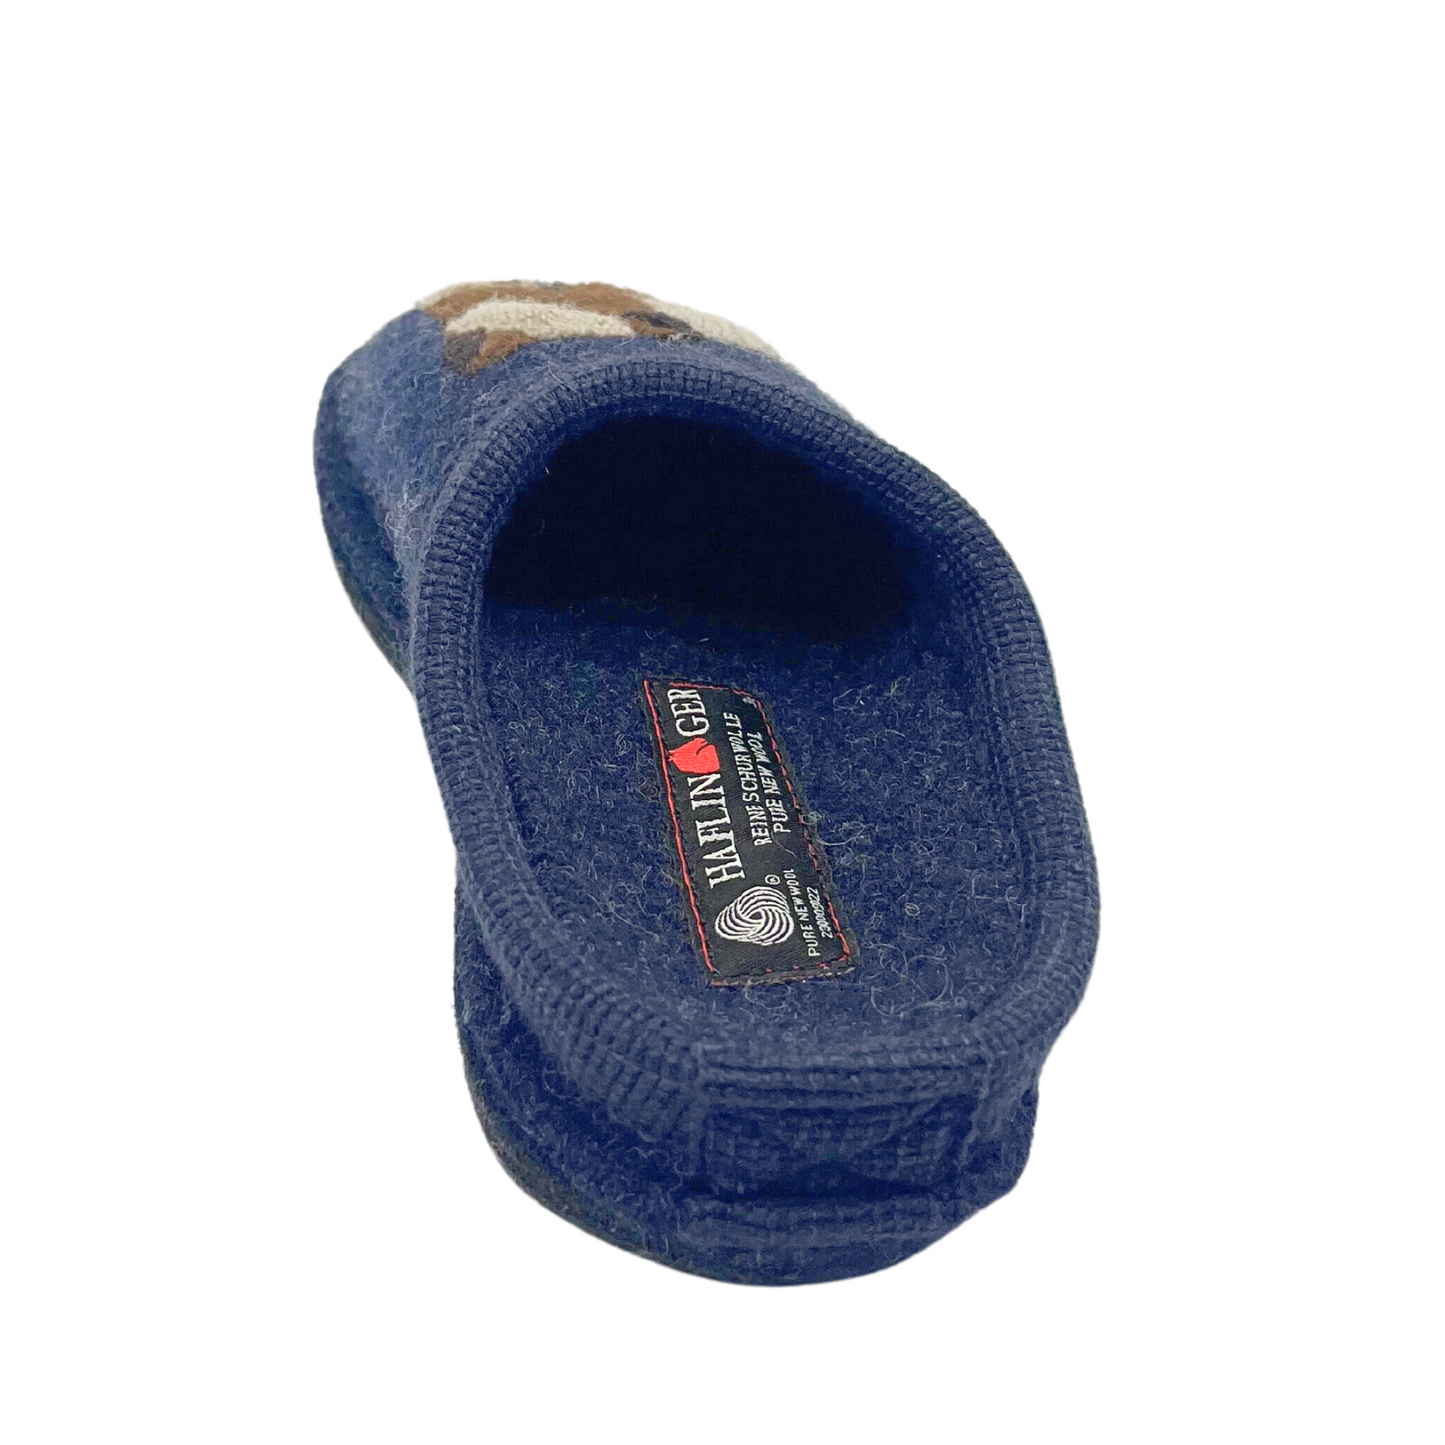 Rear view of a boild wool slipper with an anatomical foobed and slip resistant sole.  Slip on style